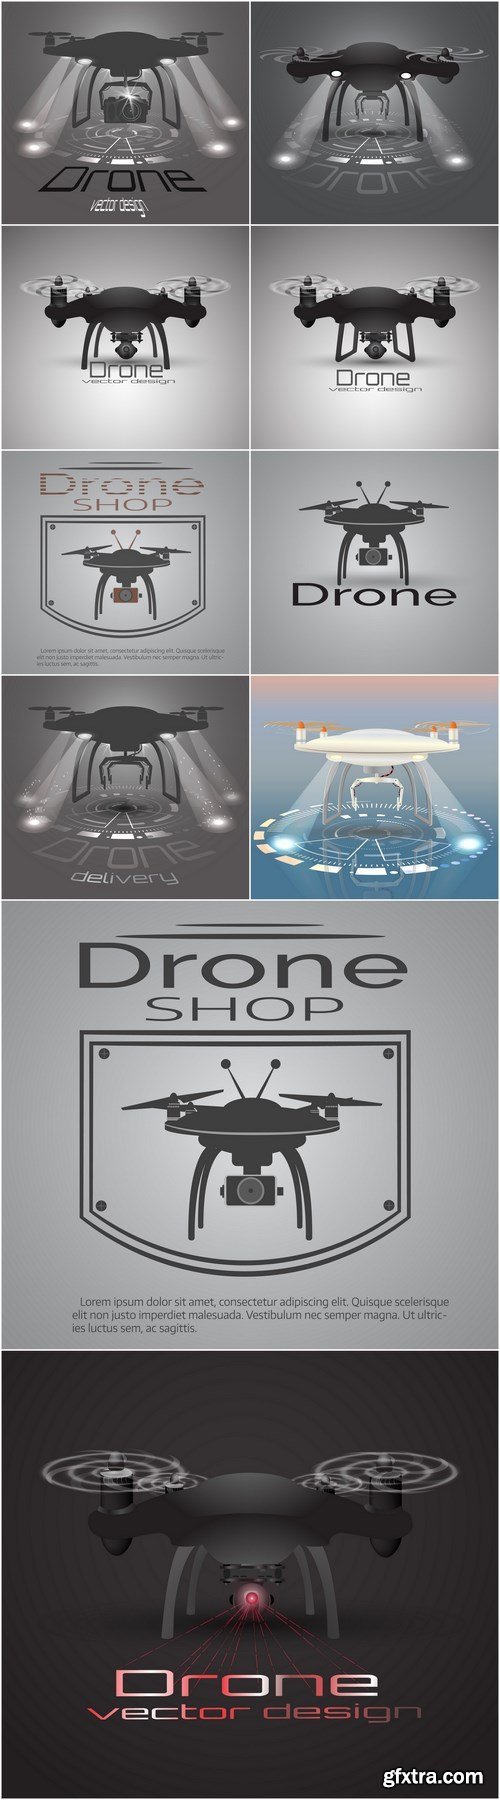 Delivery drone - 10xEPS